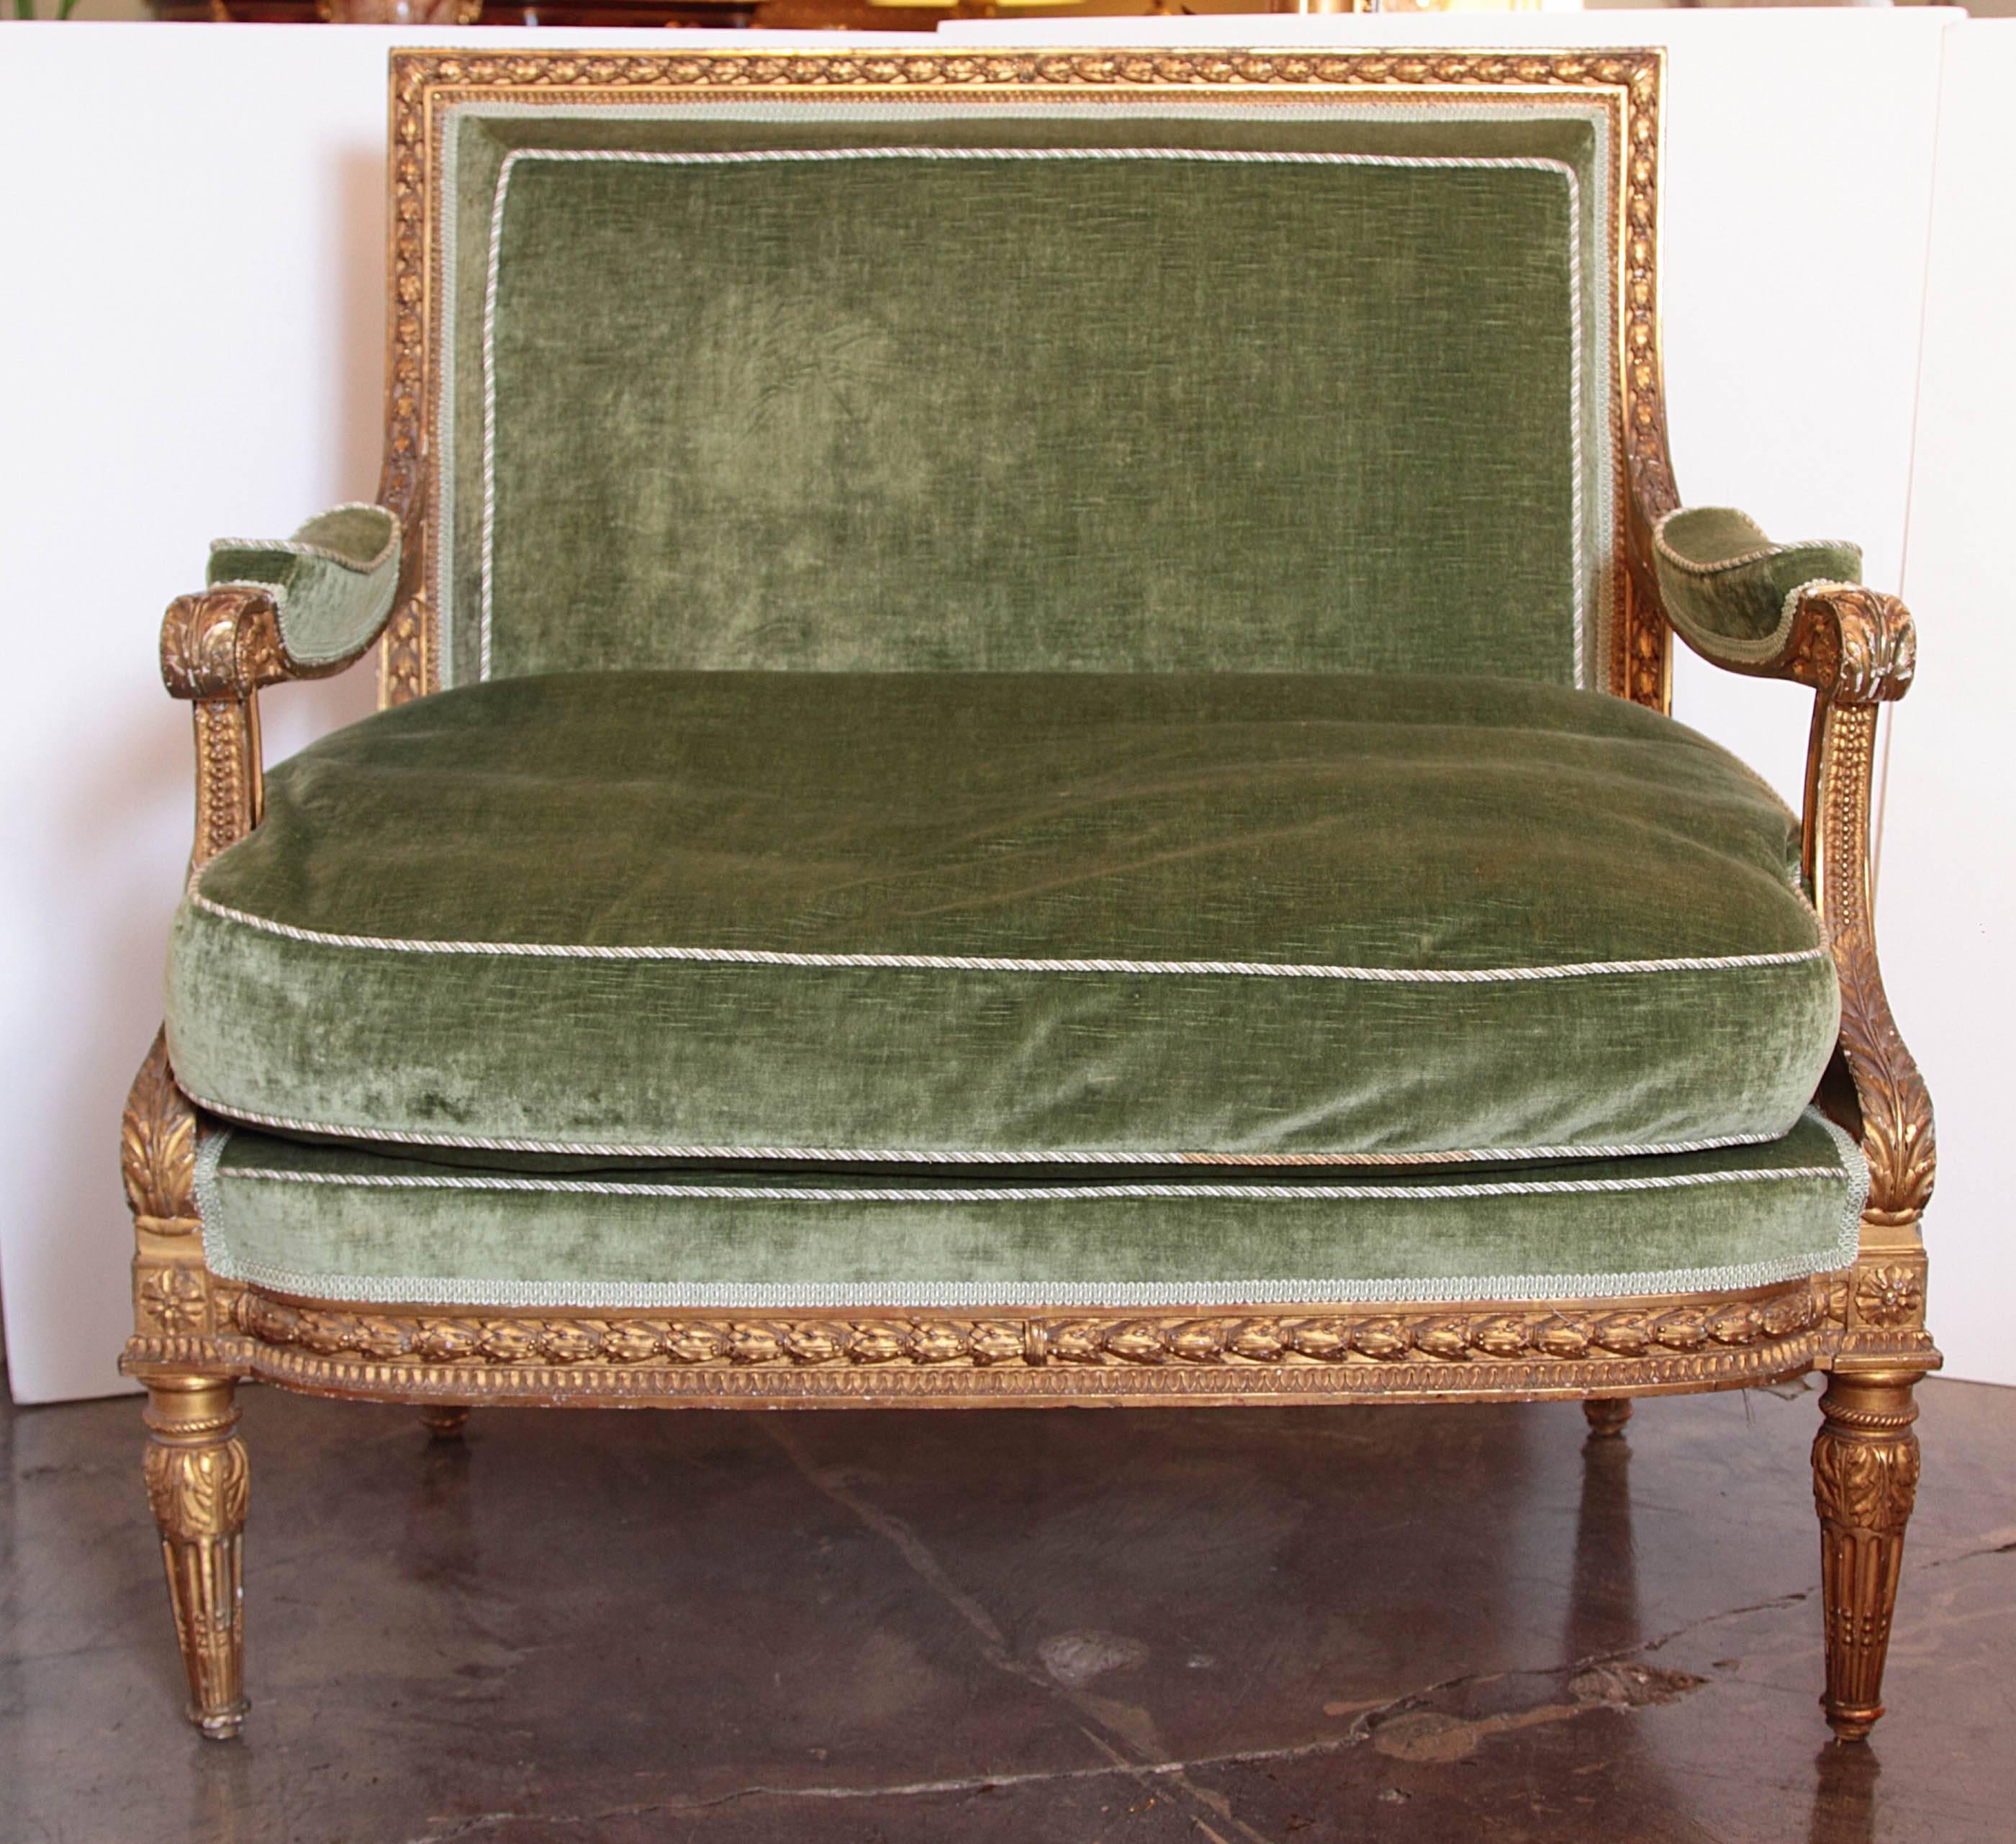 Pair of Early 19th century French Louis XVI gilt carved marquis. Original gilding and carving.